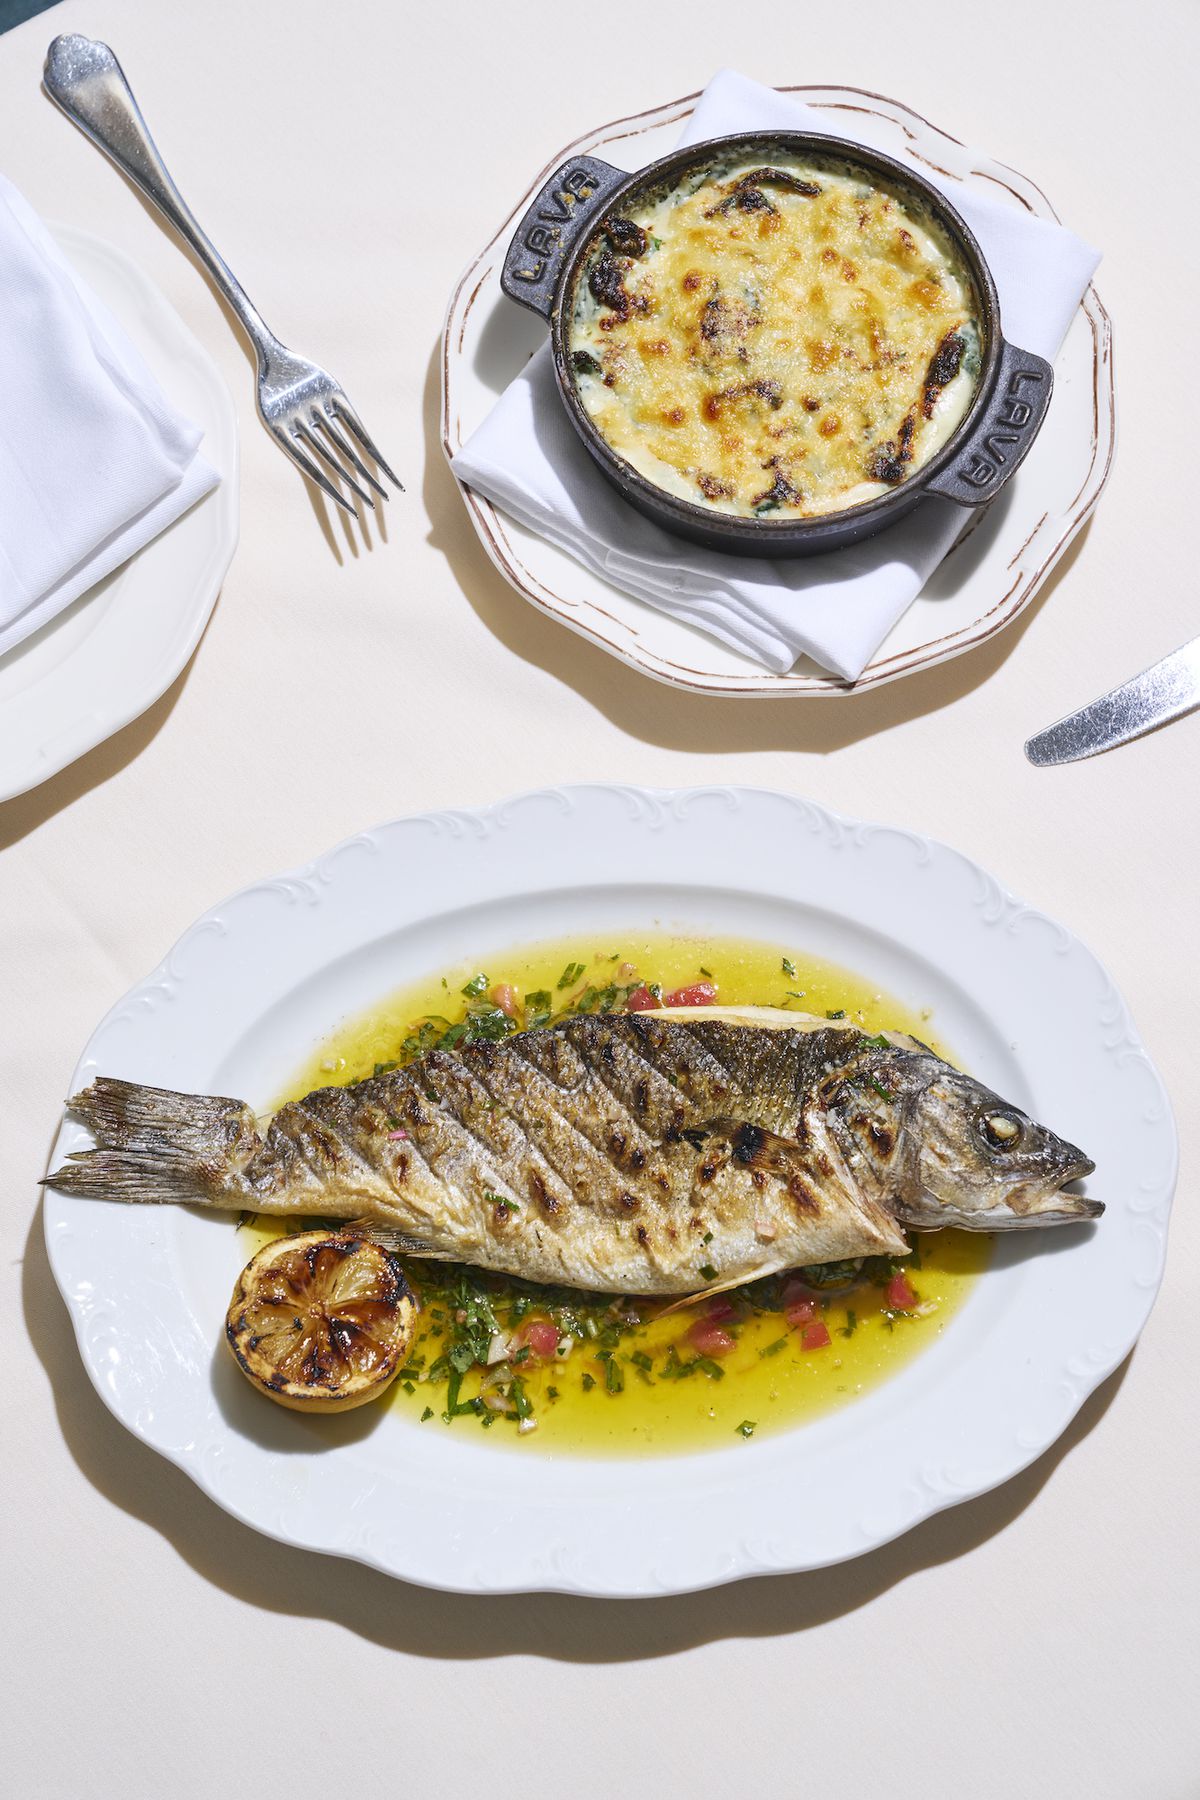 A horizontal grilled fish with head on, on a scalloped plate with side dish, against a bright white table at new restaurant Shirley Brasserie.